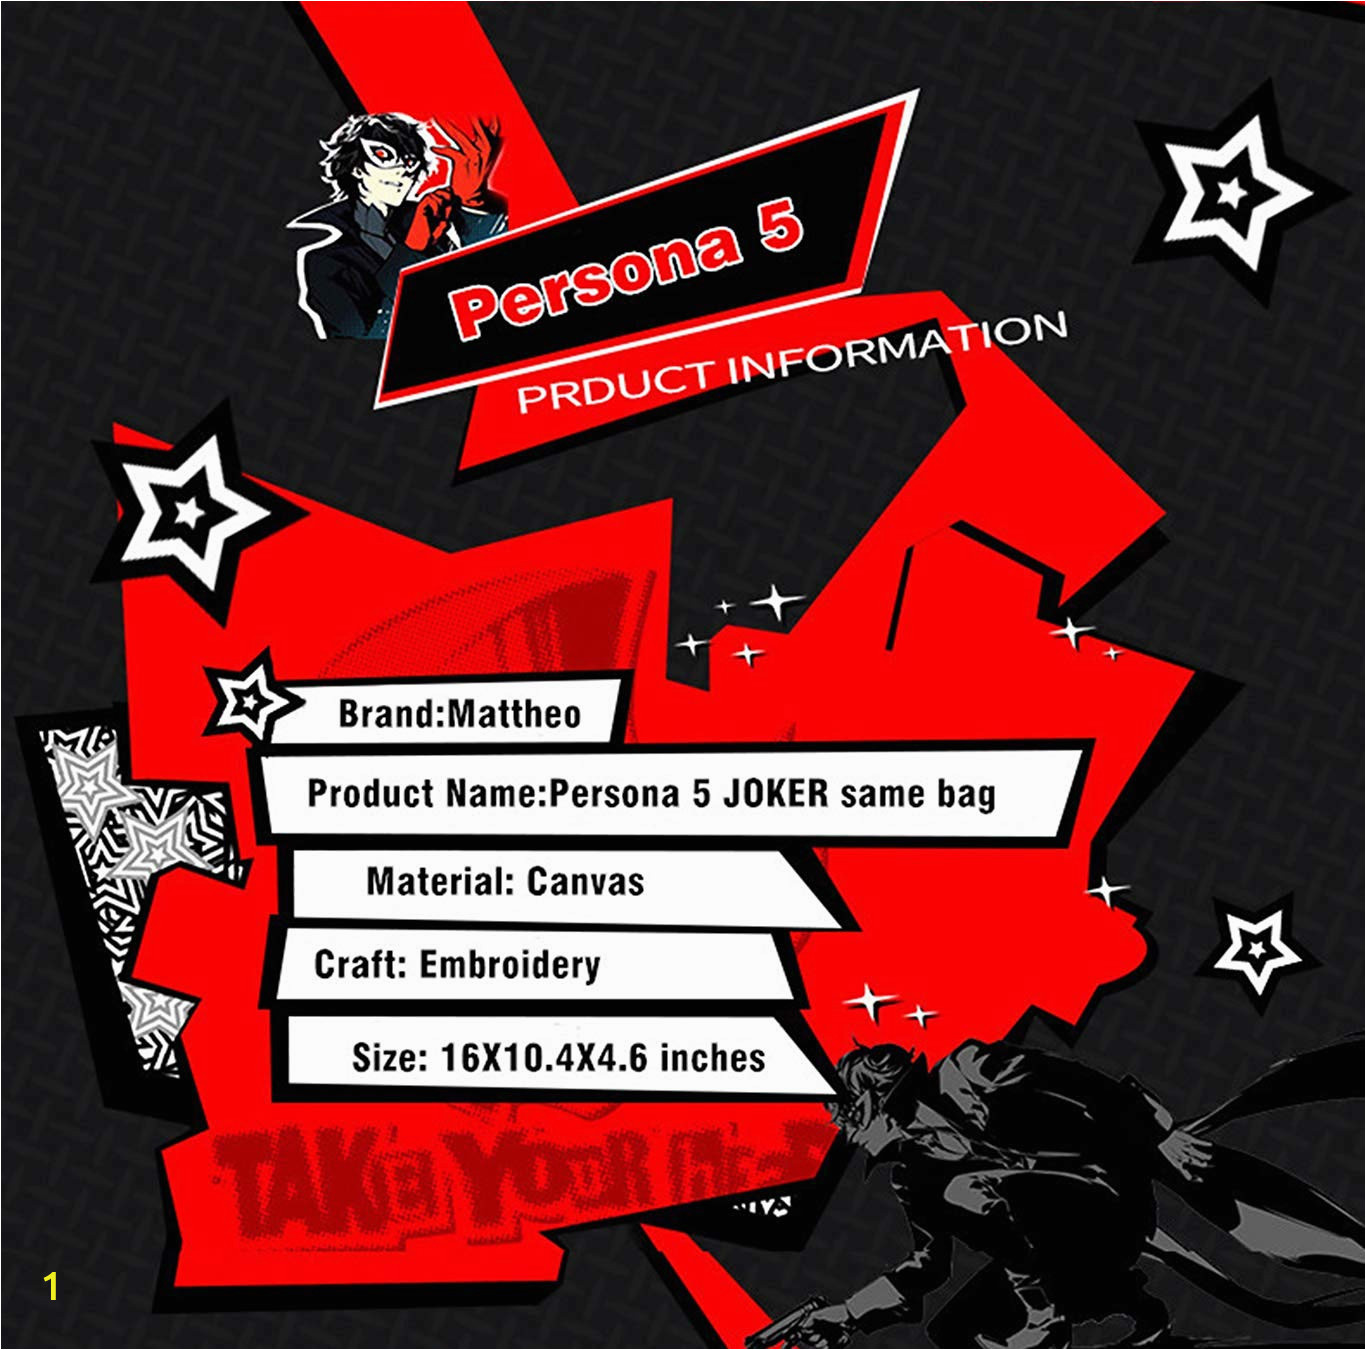 Persona 5 Coloring Pages Amazon Game Persona 5 P5 Joker High School Jk Bag